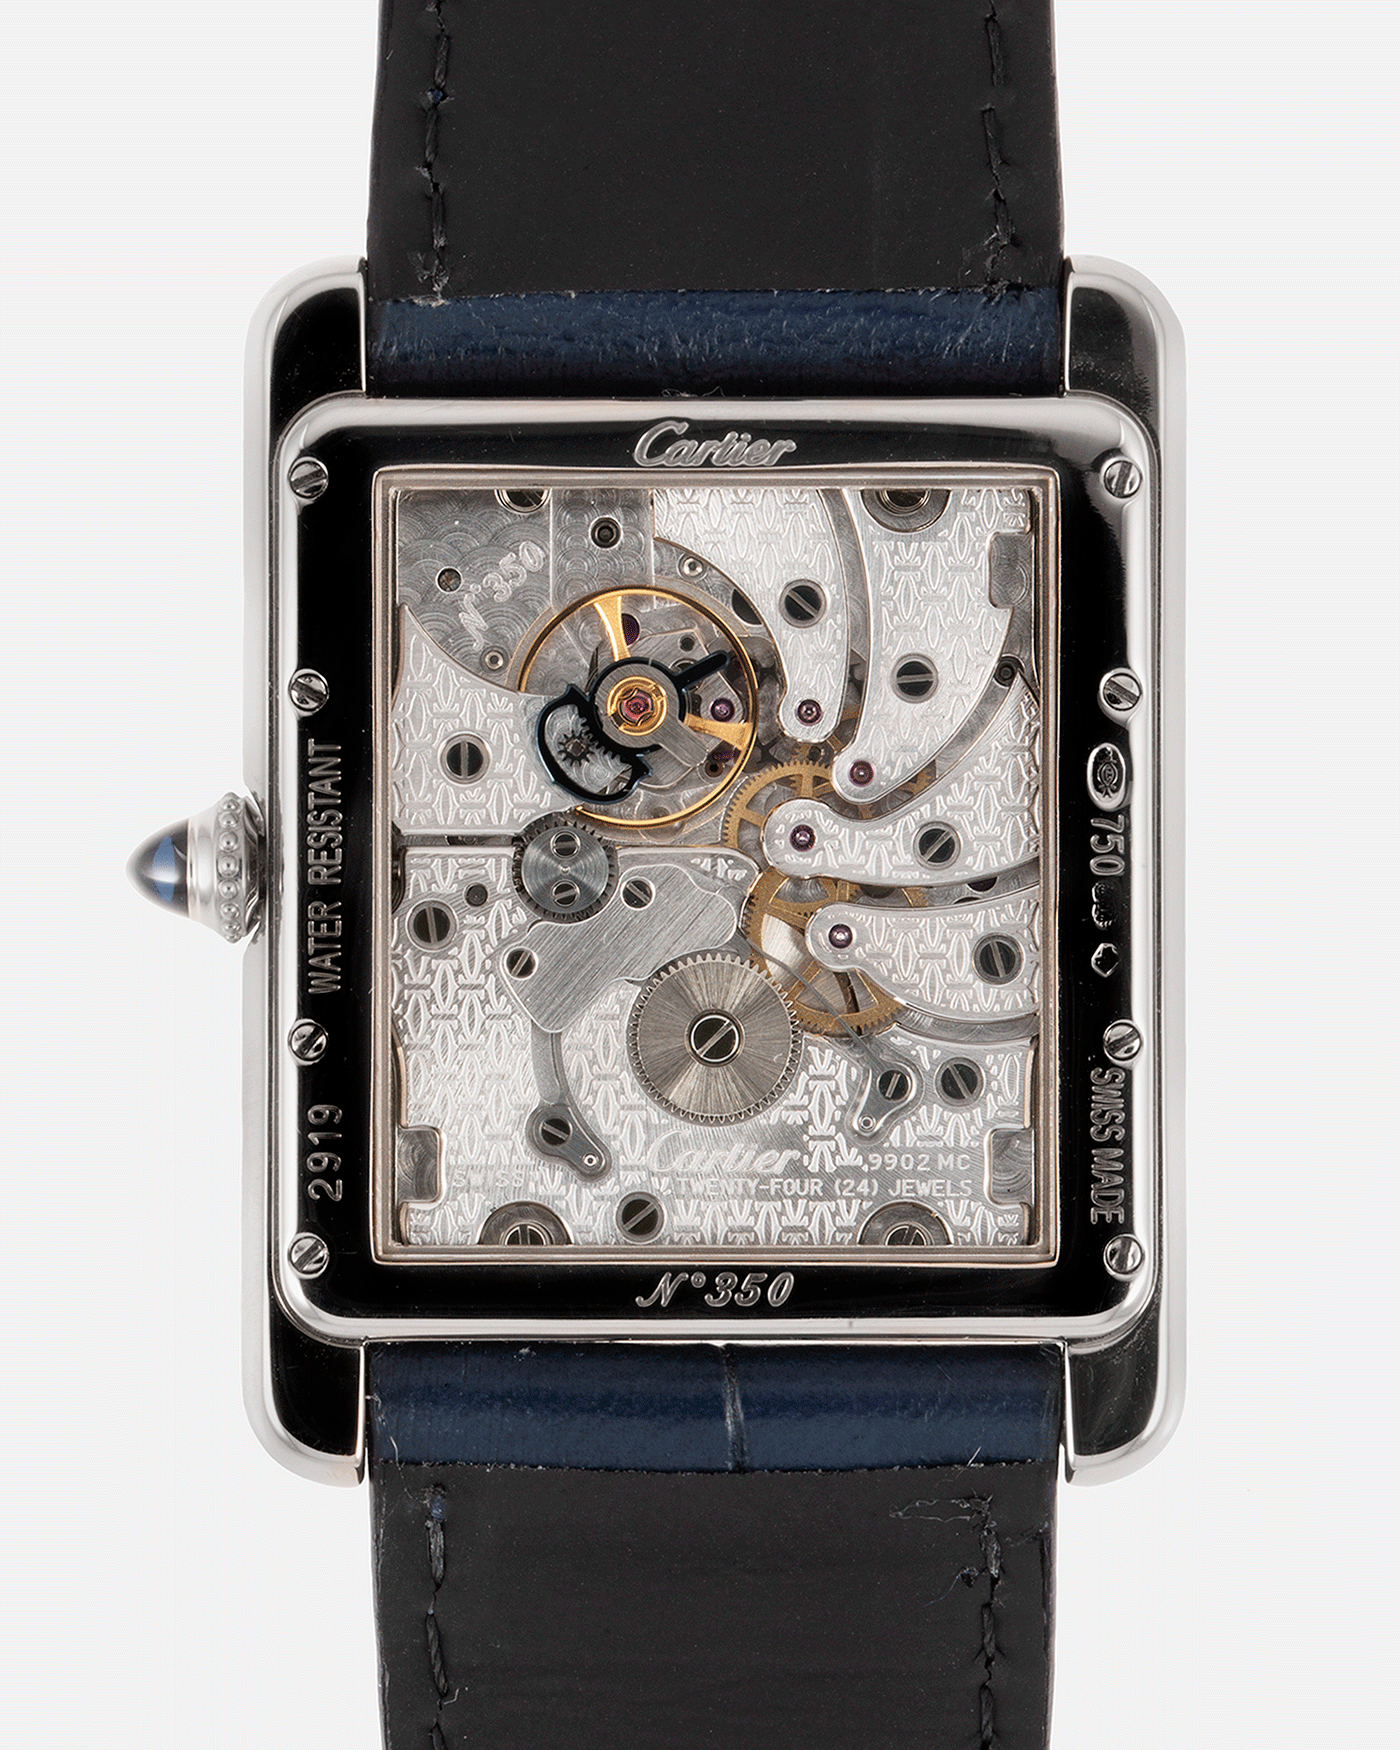 Brand: Cartier Year: 2000’s Model: Collection Prive Tank Louis Cartier Wandering Hours Reference: 2919 Material: 18k White Gold Movement: Piaget-Based Manually Wound Cal. 9902 MC Case Diameter: 28mm width, 40.5mm lug to lug Strap: Blue Cartier Alligator with 18k Cartier White Gold Deployant